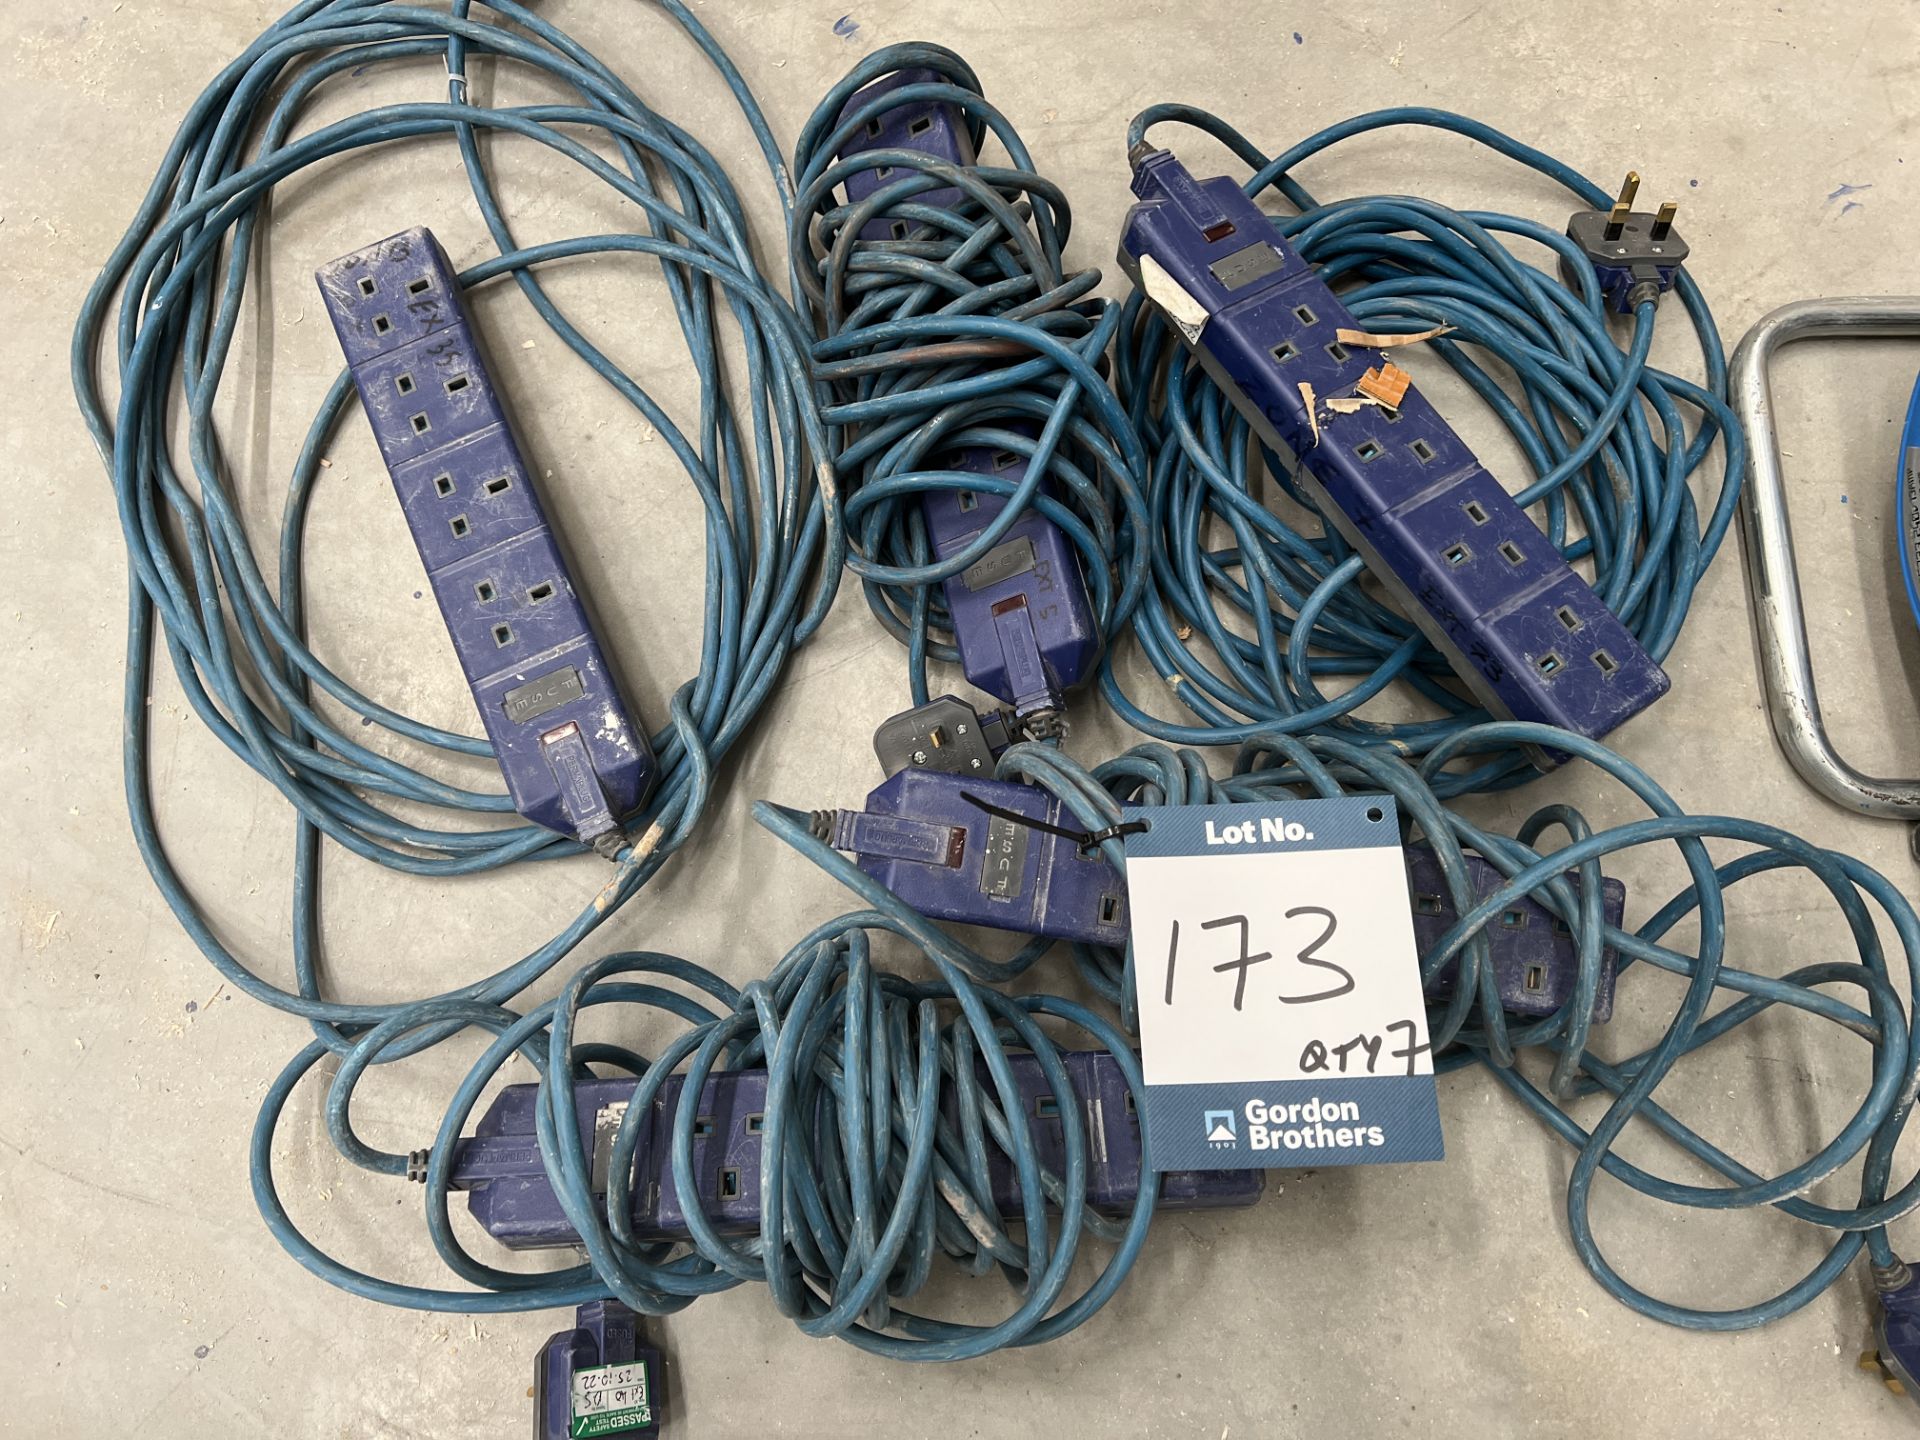 2x (no.) 230v extension reels and 5x (no.) four way 230v extension cables - Image 3 of 4